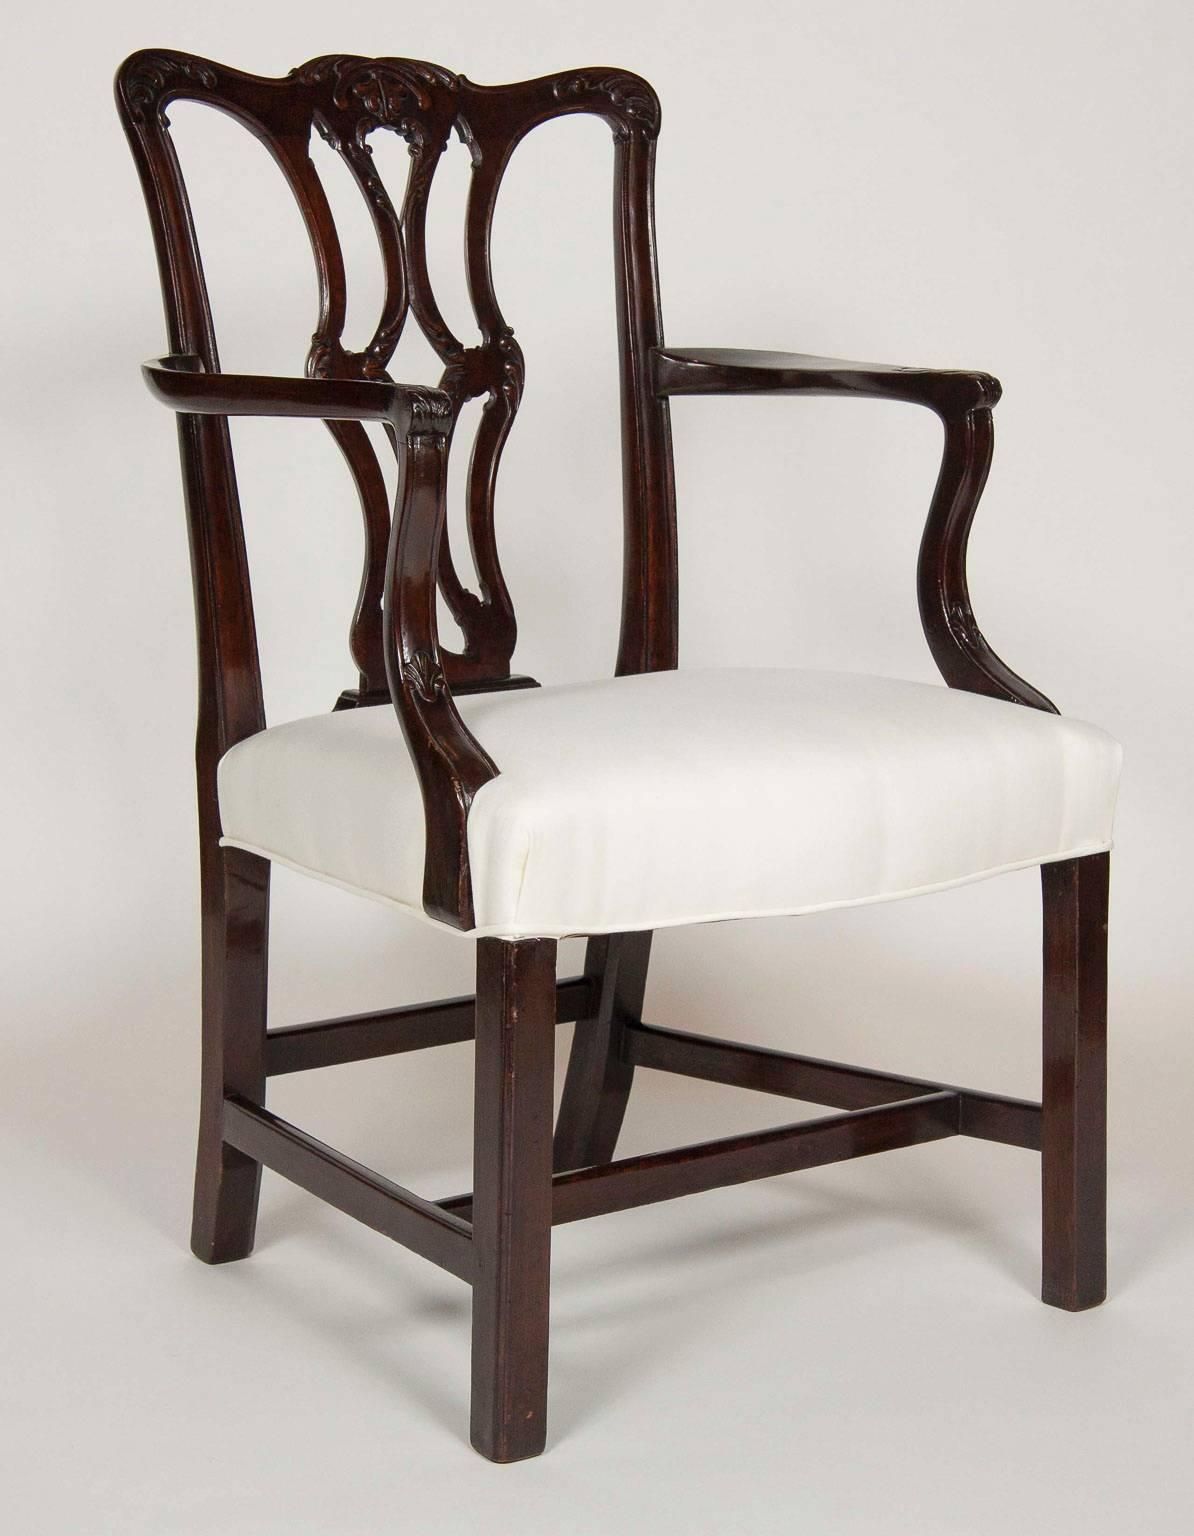 Each with a serpentine crestrail over a pierced carved splat, bowed seat raised on straight square legs with box stretchers. Comprising a pair of armchairs.